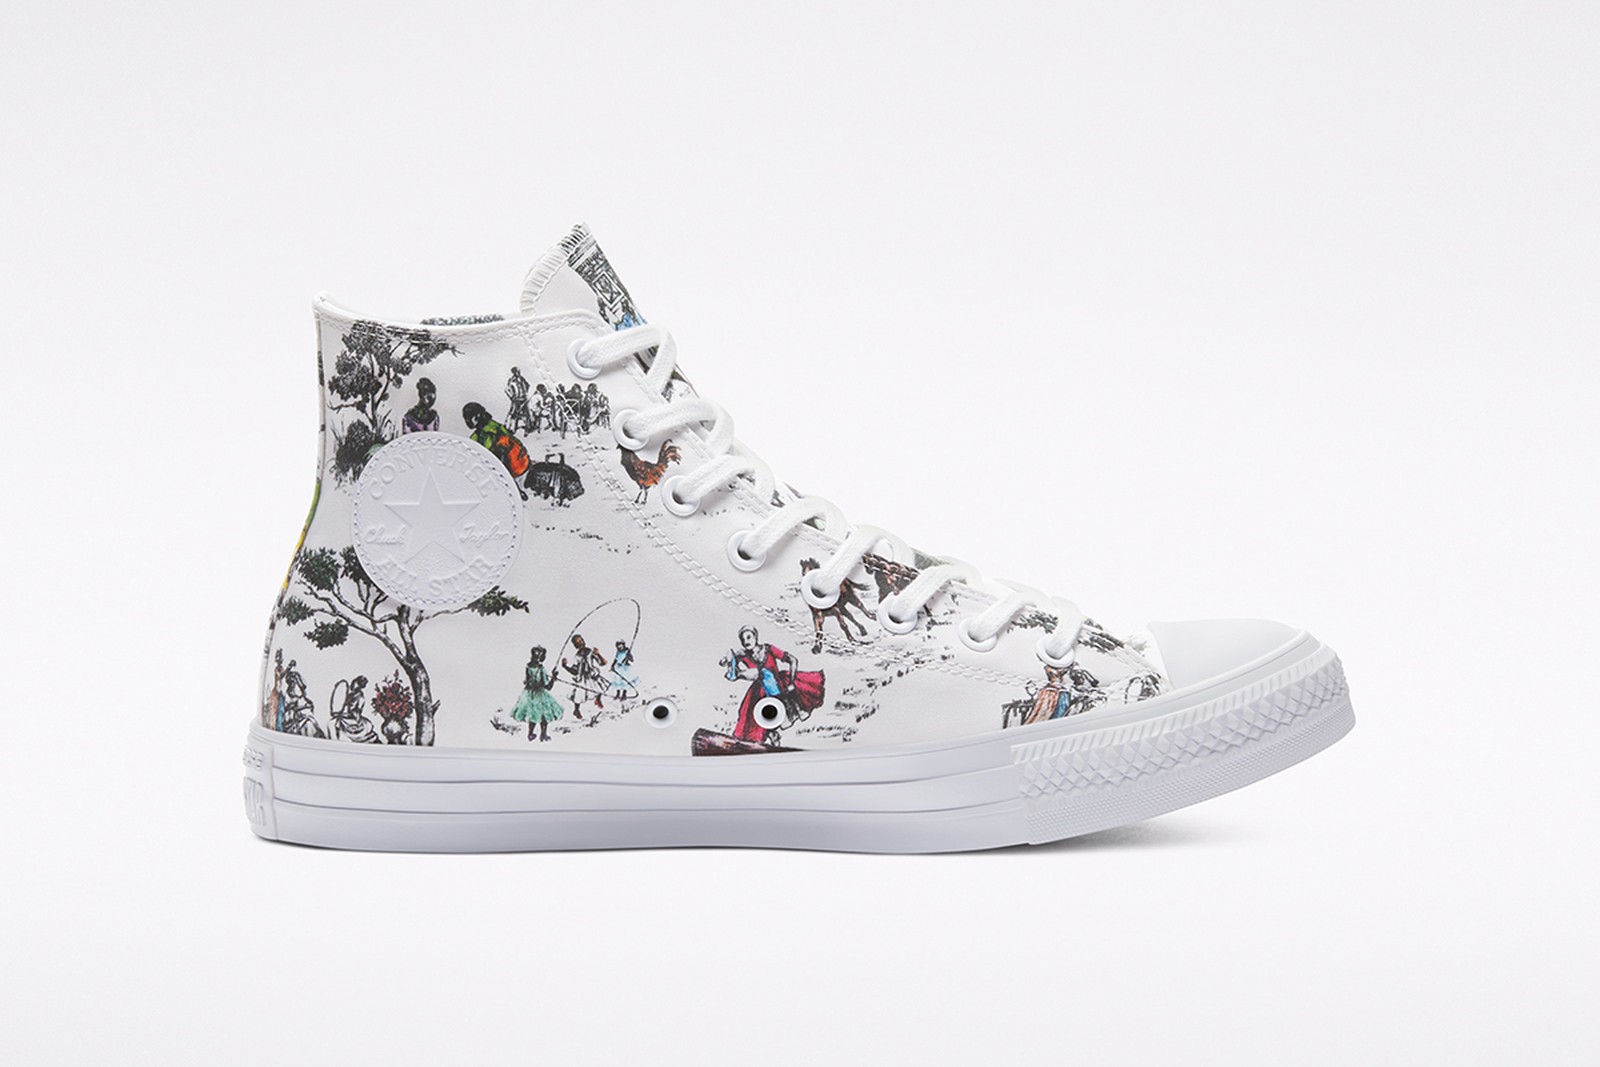 Converse Links With Union For Chuck Taylor Ft. Sheila Bridges